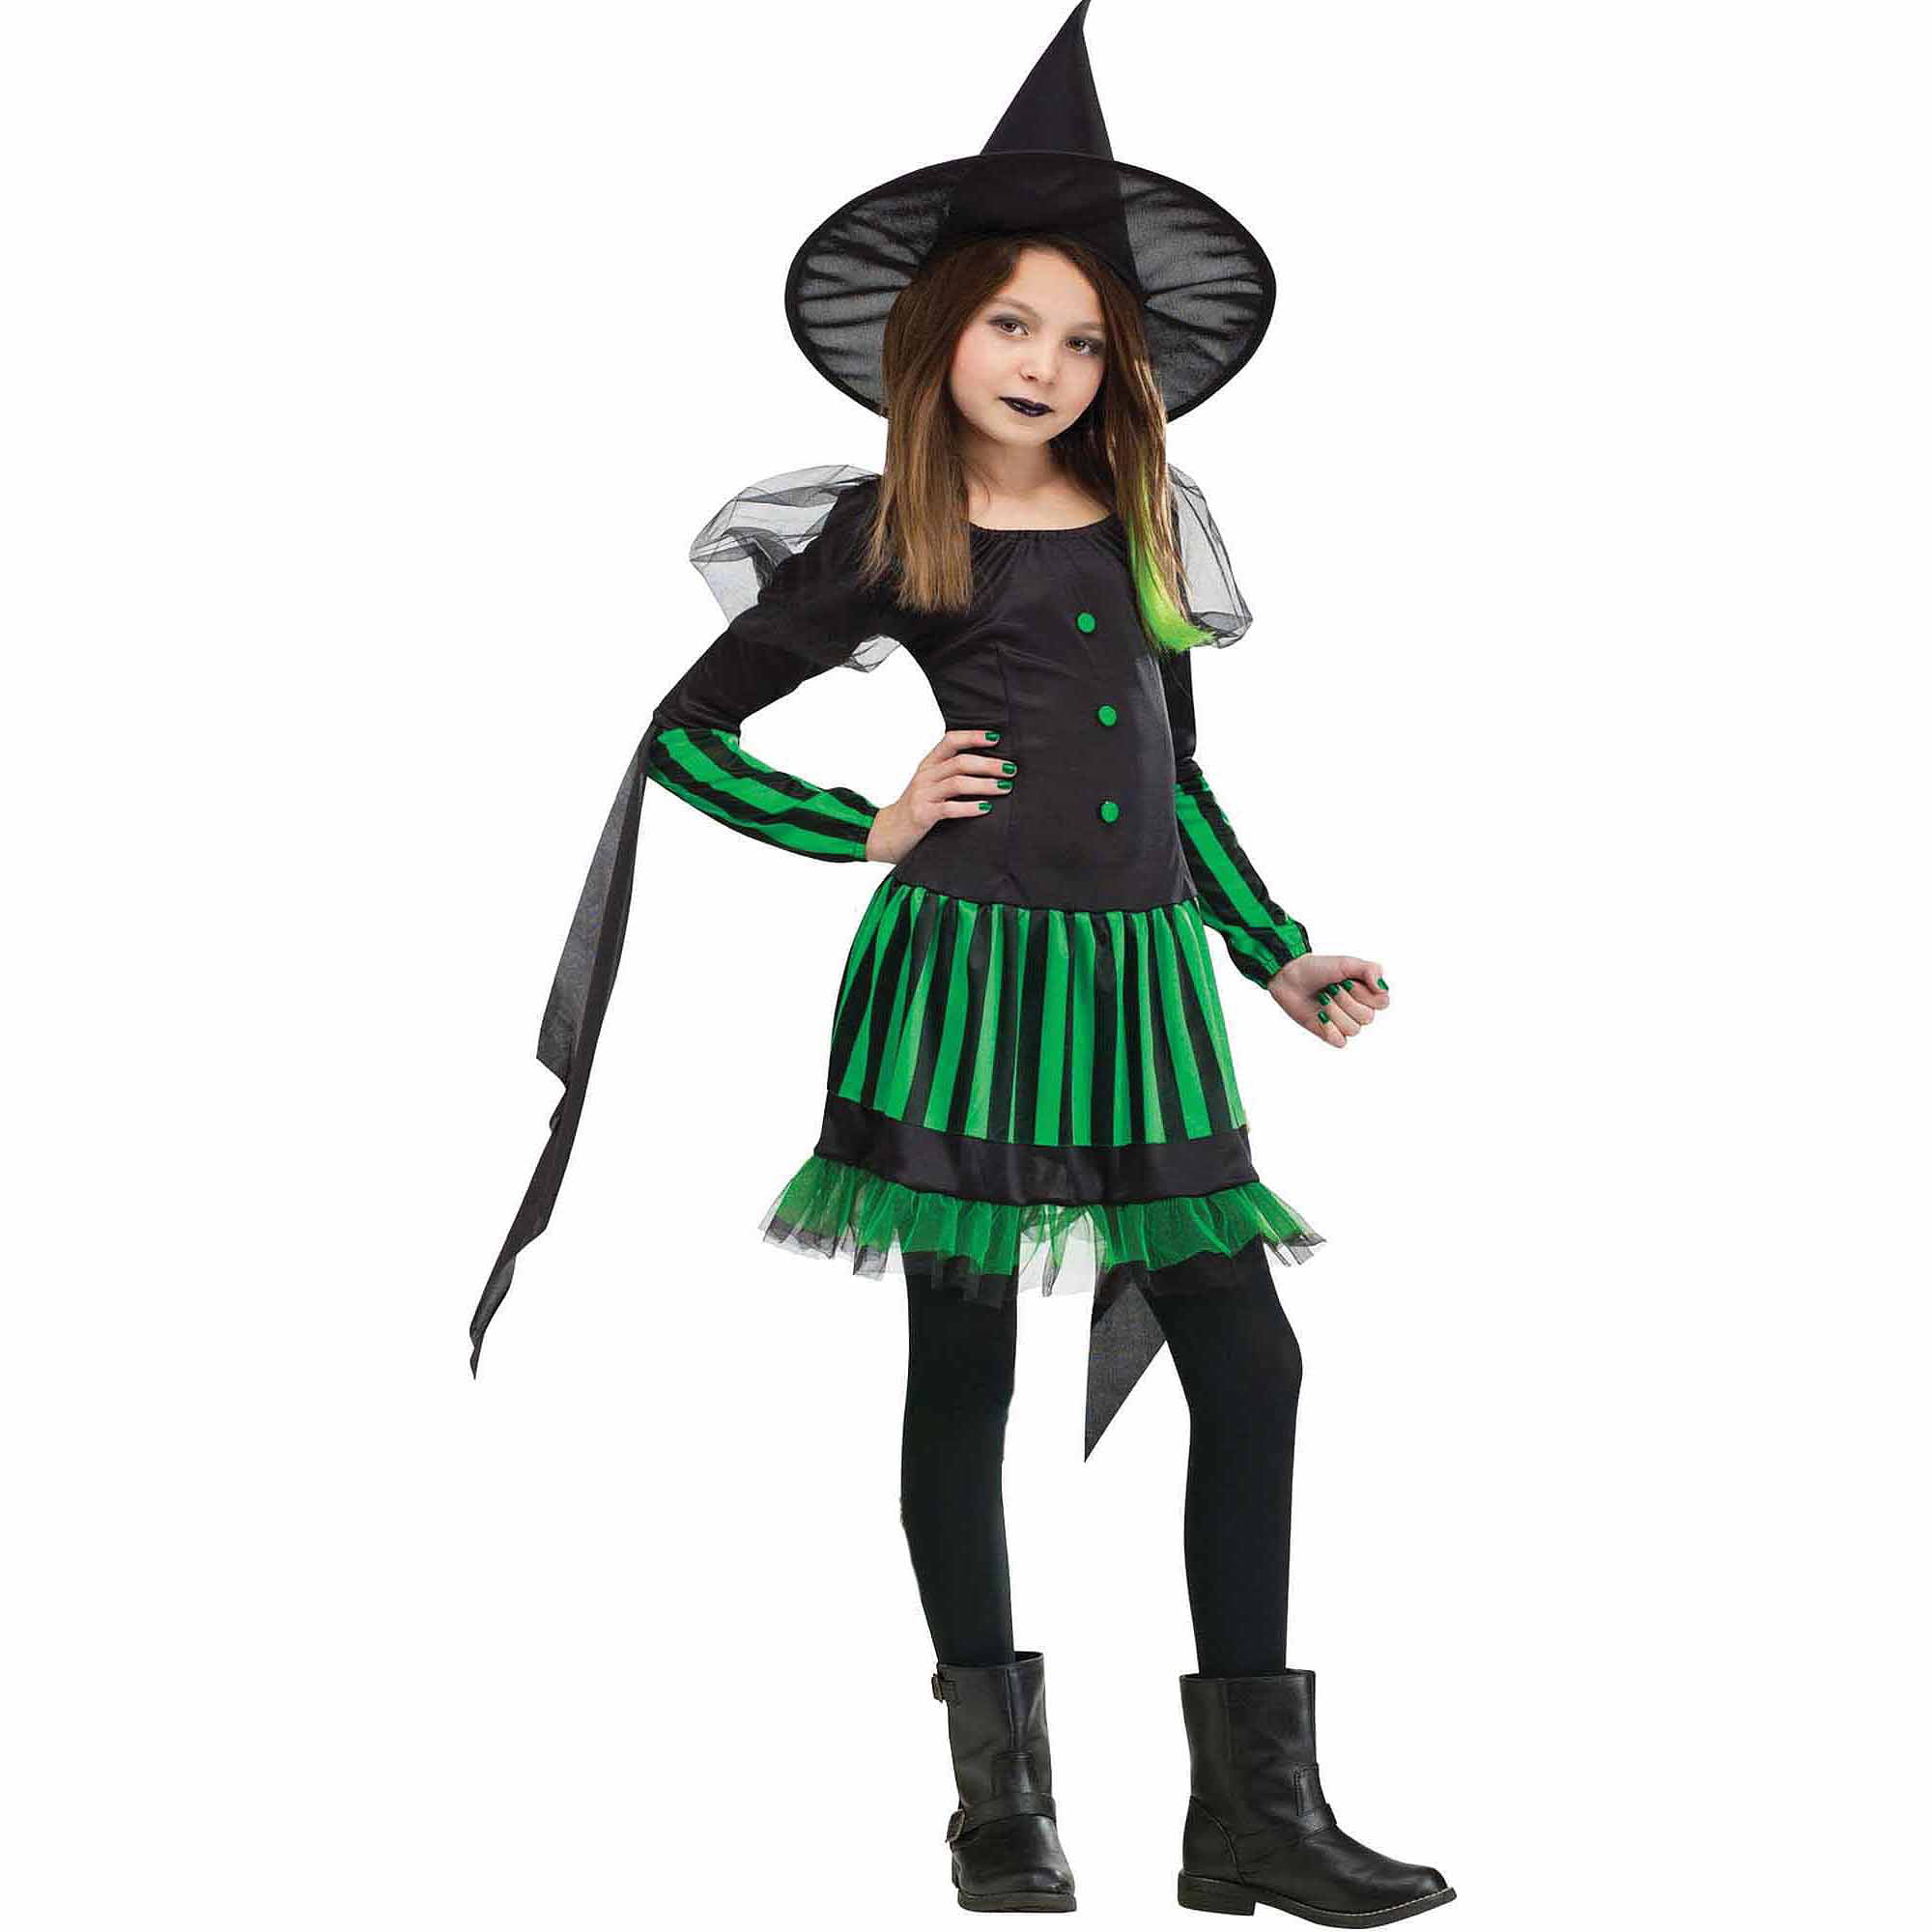 Ombre Wicked Witch Tights Girls Halloween Fancy Dress Childrens Kids Costume 